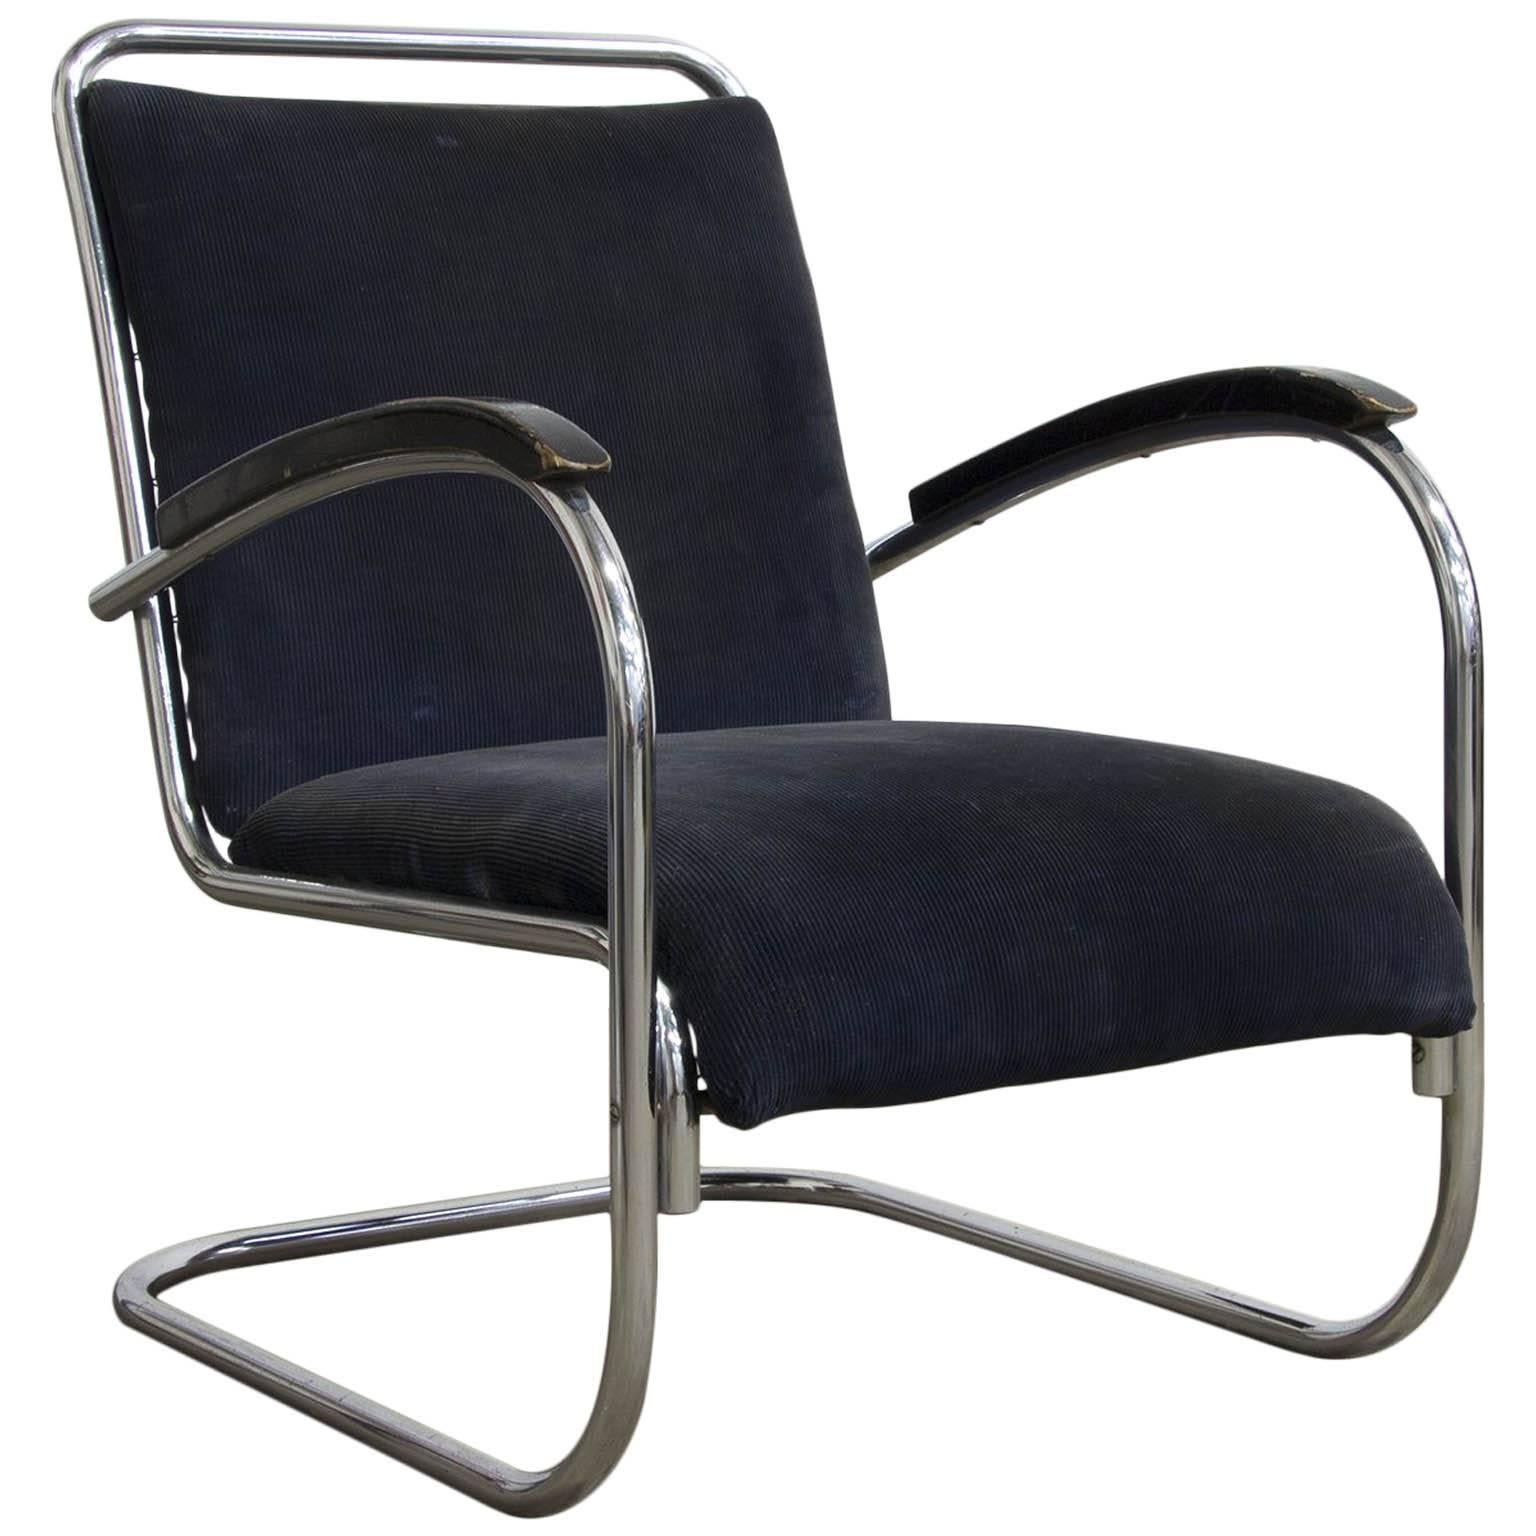 1930s, Paul Schuitema Easy Chair, Fabric with Black Lacquered Wooden Armrests